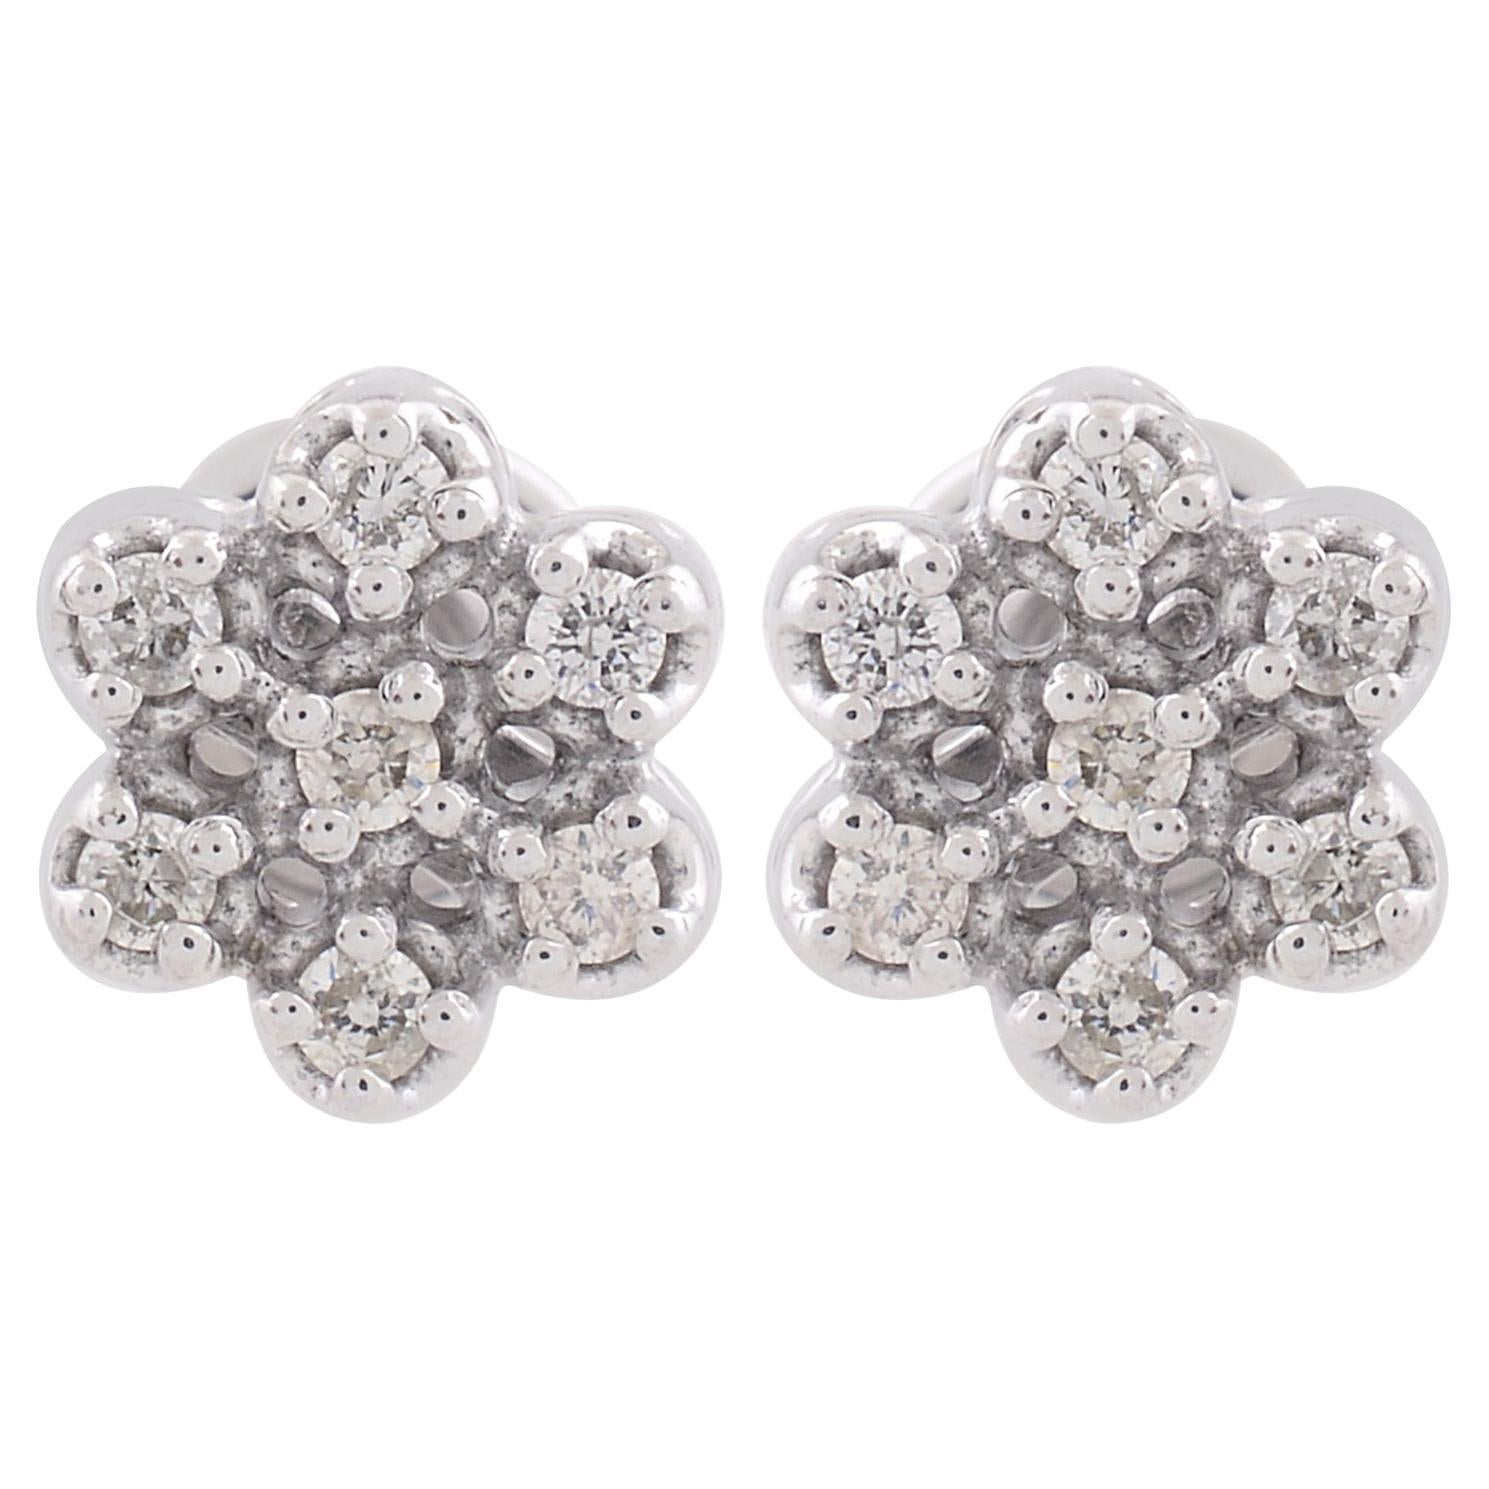 0.14 Carat Pave Diamond Flower Stud Earrings Solid 10k White Gold Fine Jewelry For Sale